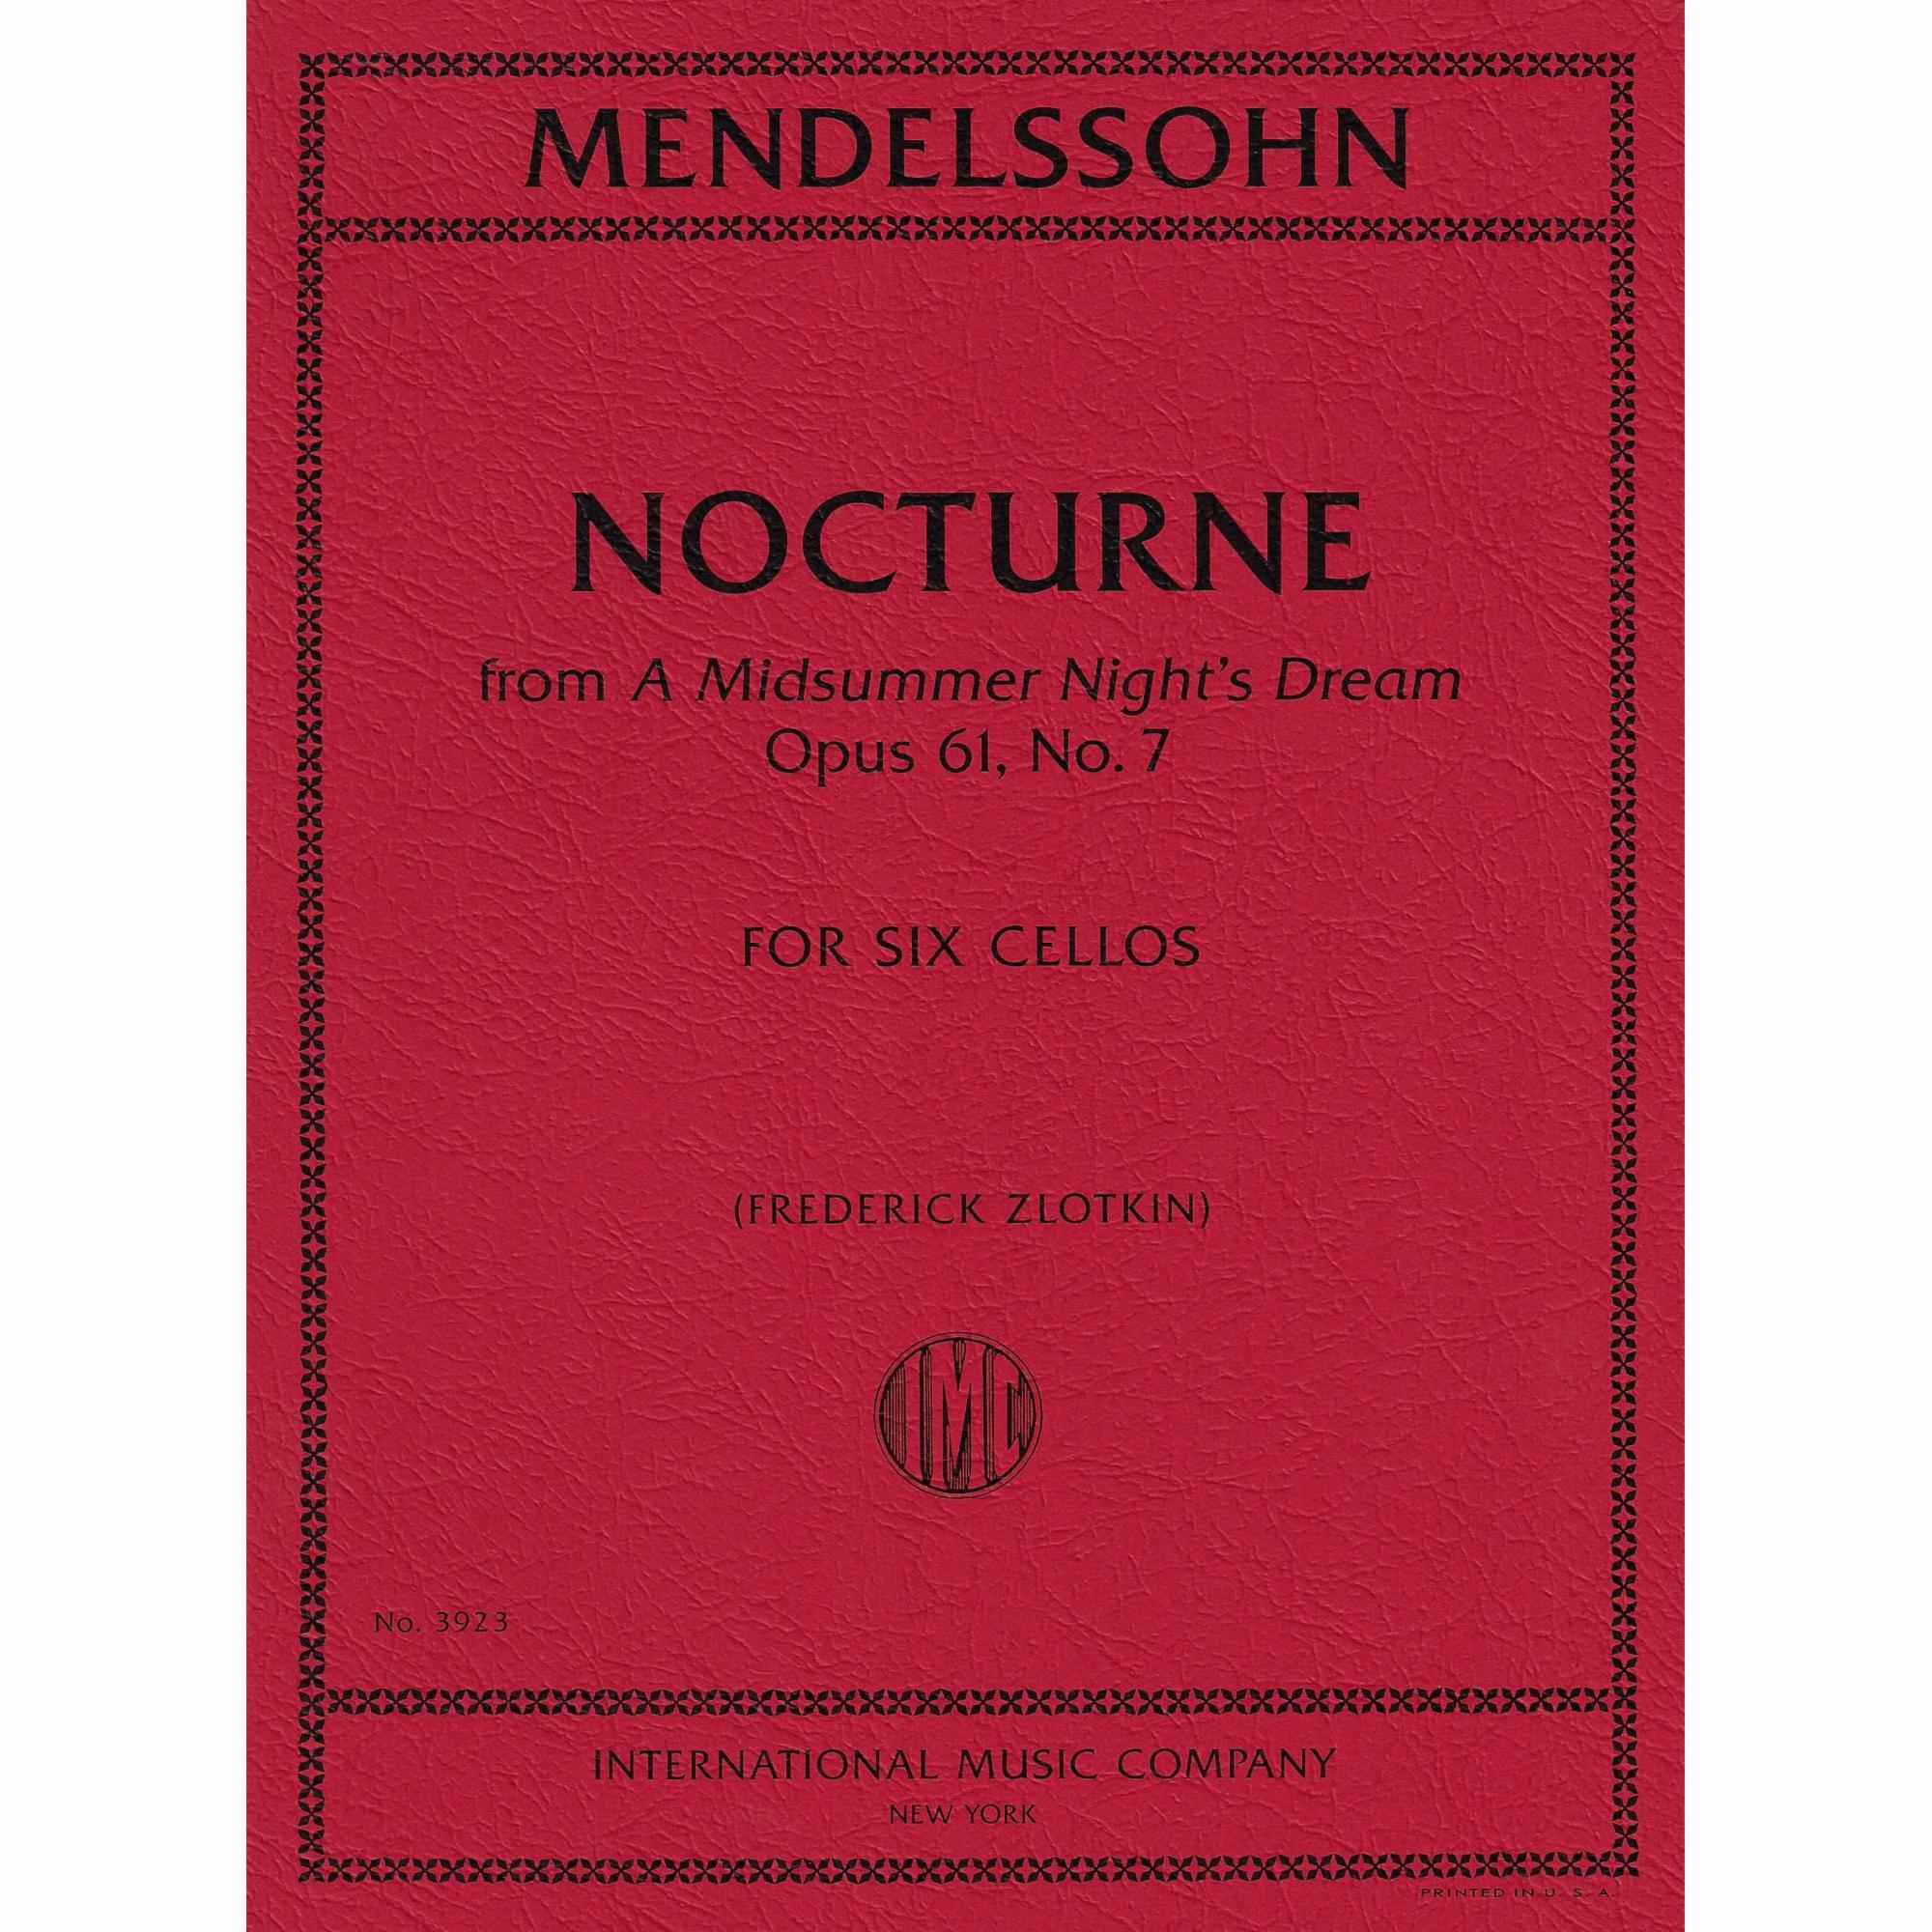 Mendelssohn -- Nocturne, from A Midsummer Night's Dream, Op. 61, No. 7 for Six Cellos